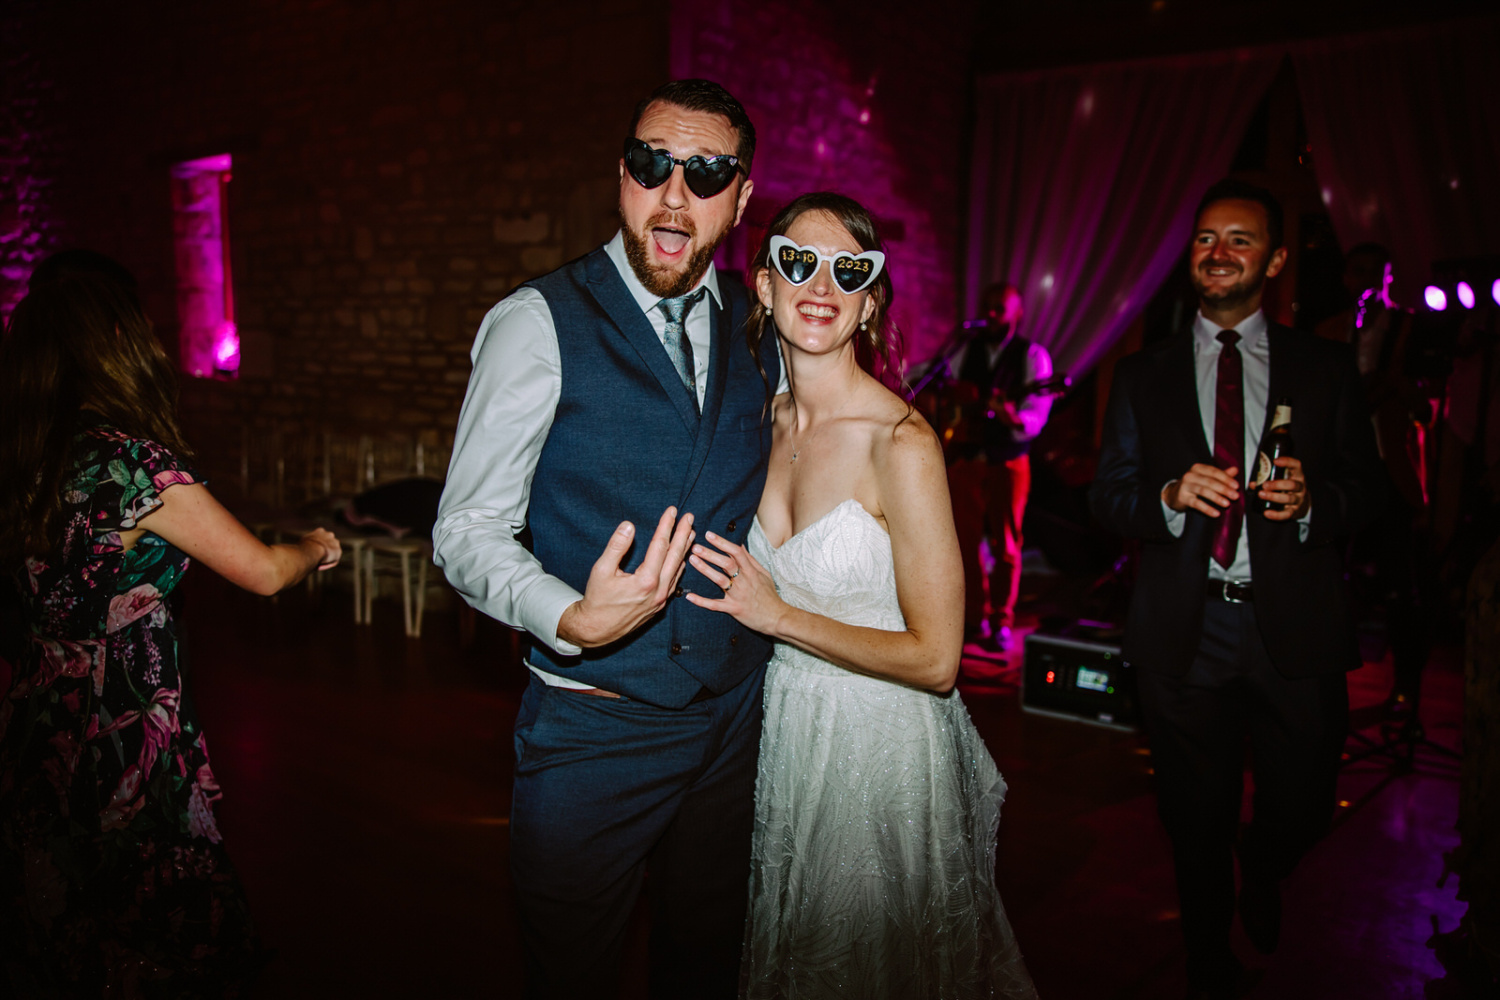 The Bride and groom with heart shaped sunglasses dancing on the dance floor at a party.